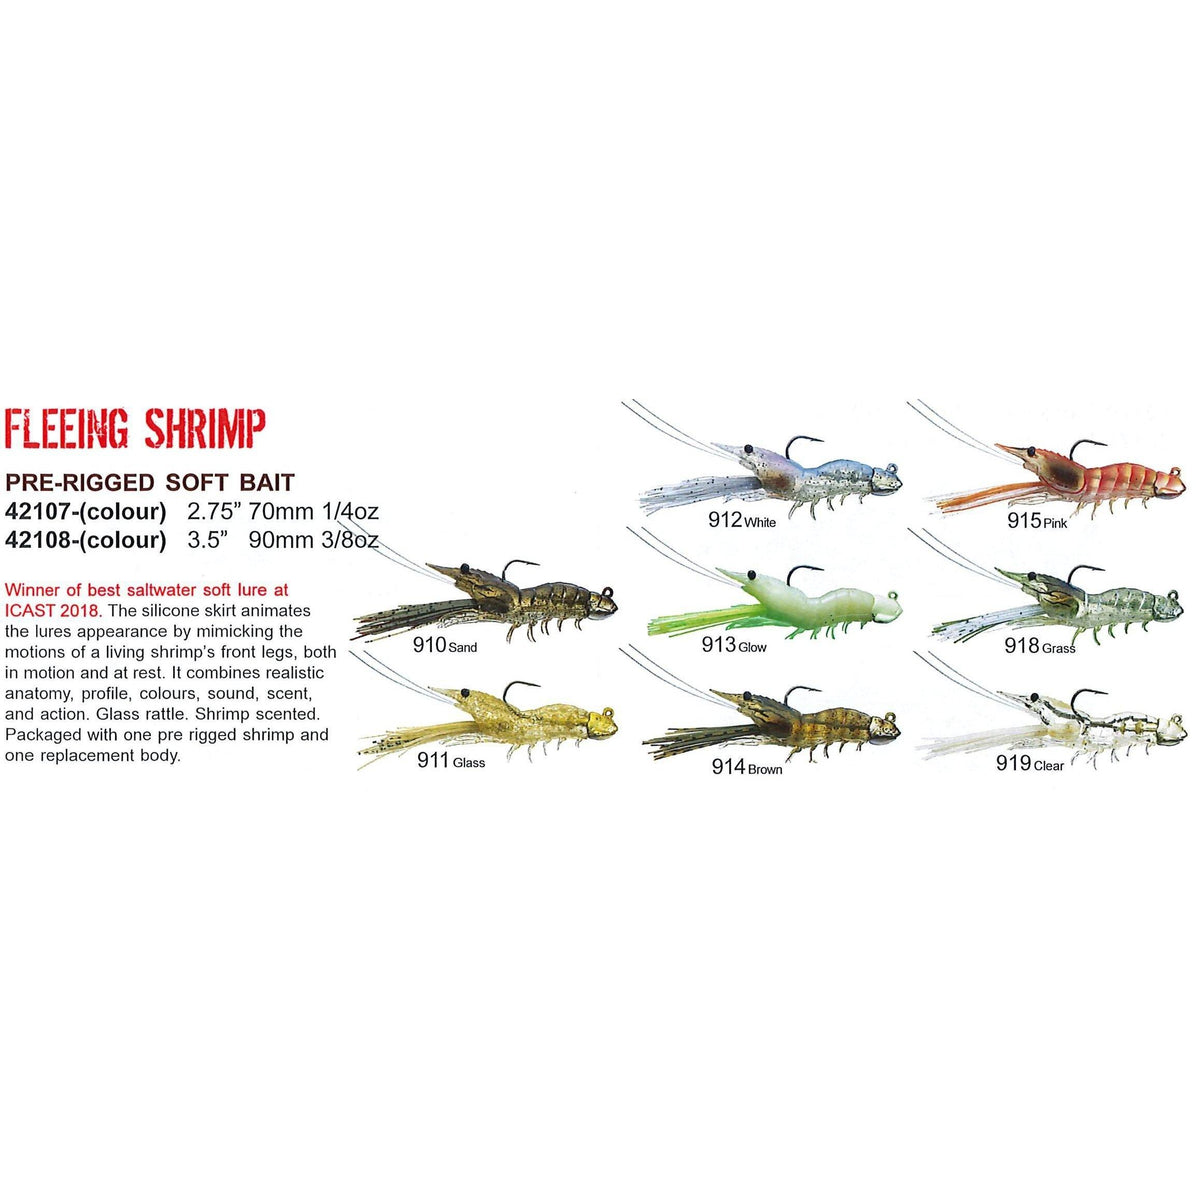 Best Sellers at Addict Tackle - What's hot in fishing tackle Page 16